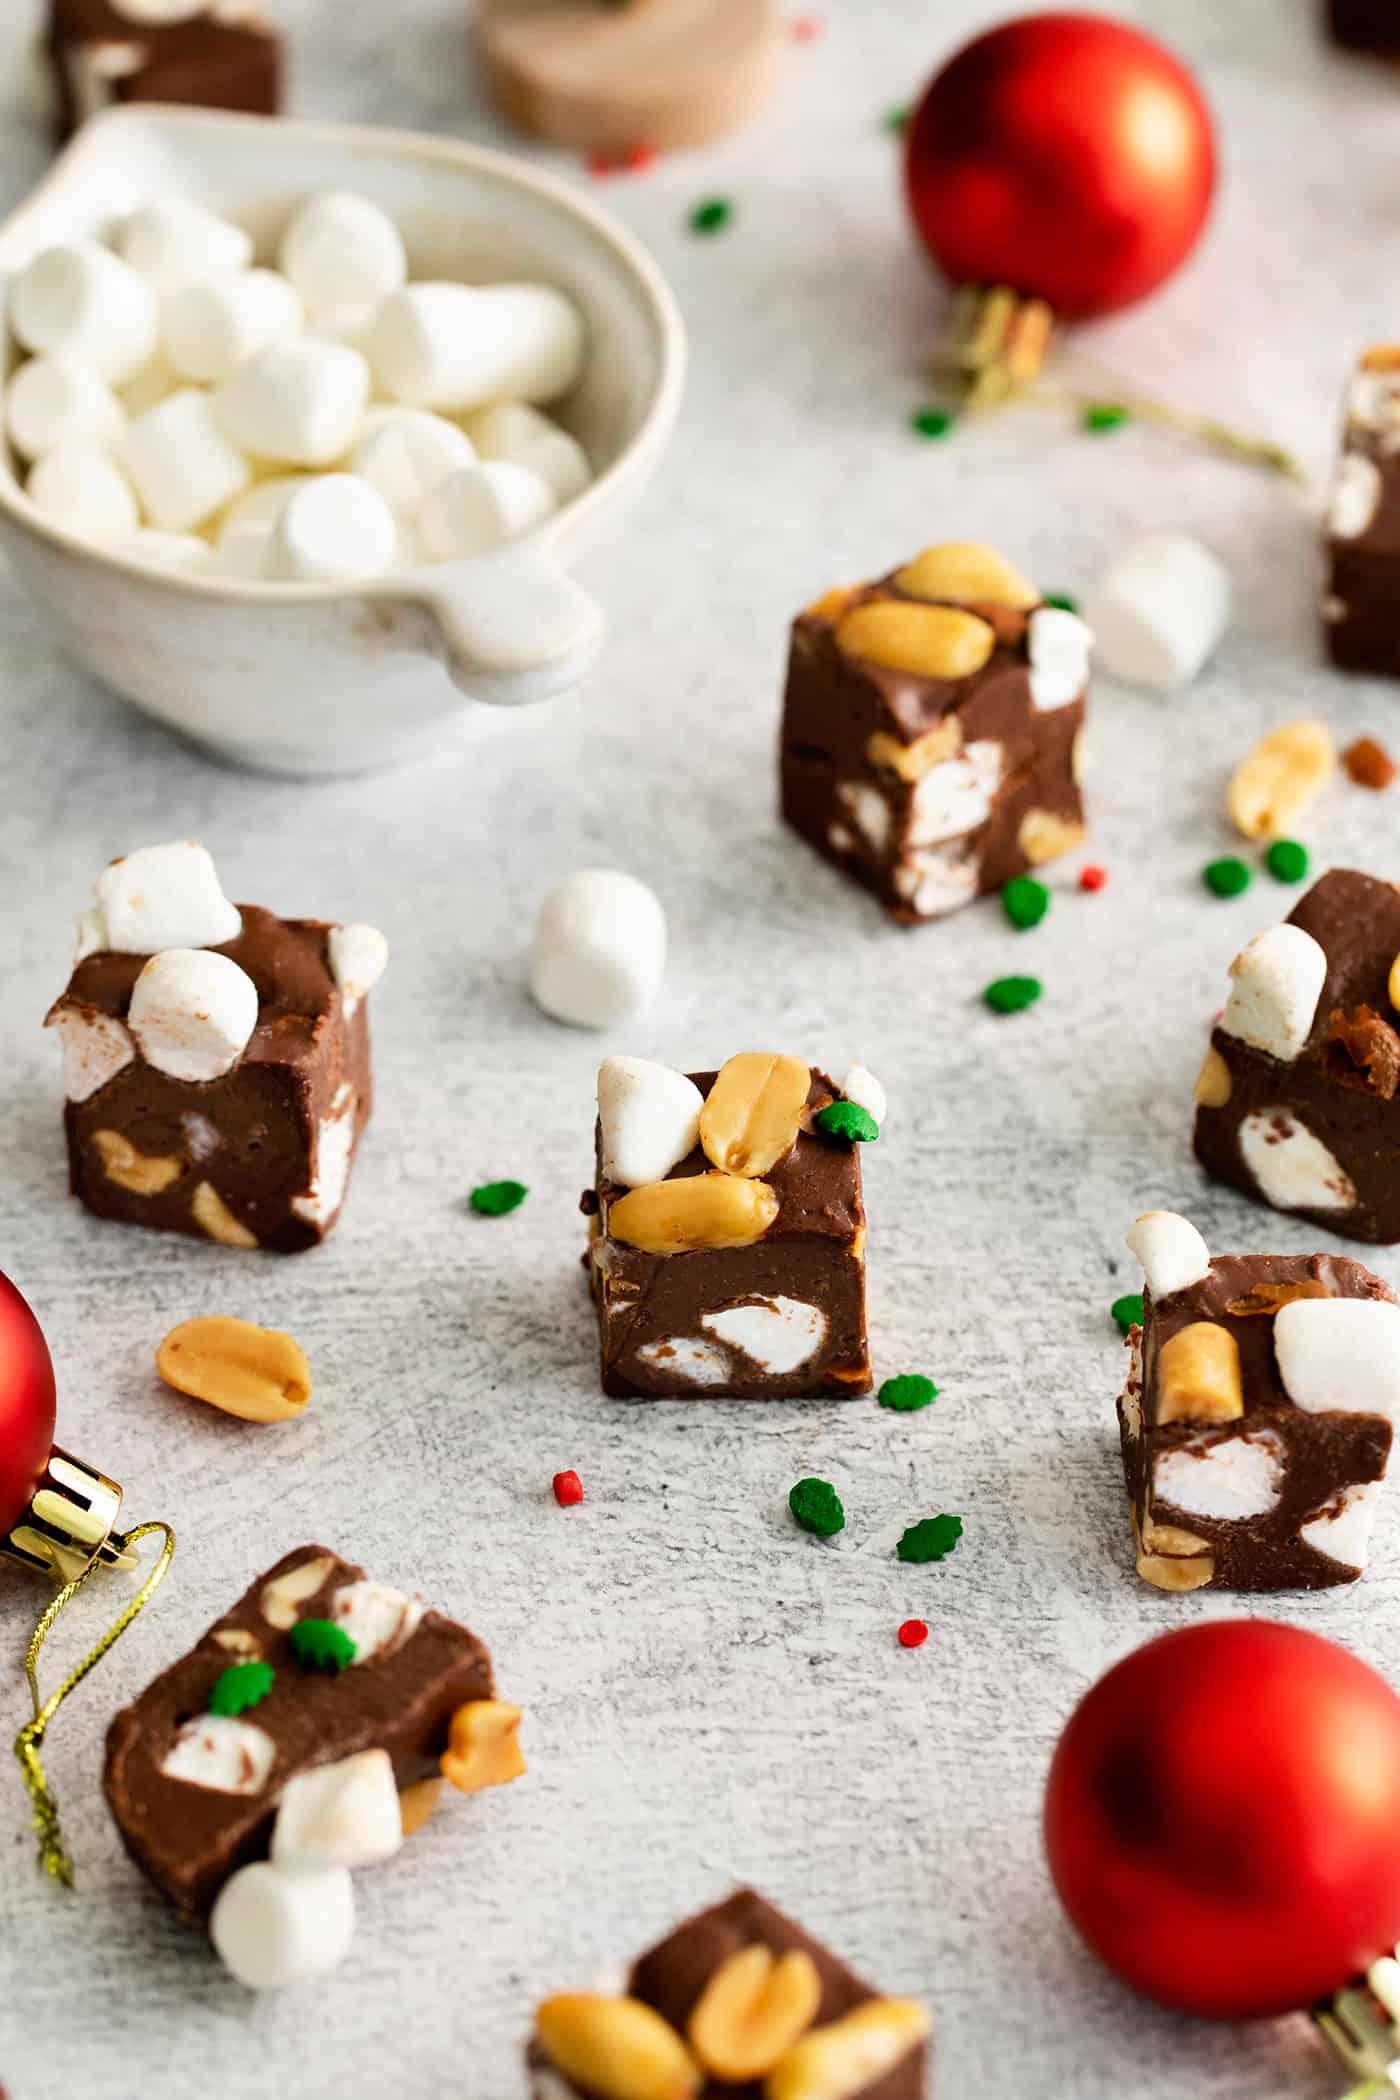 Rocky road fudge on the table with Christmas bulbs